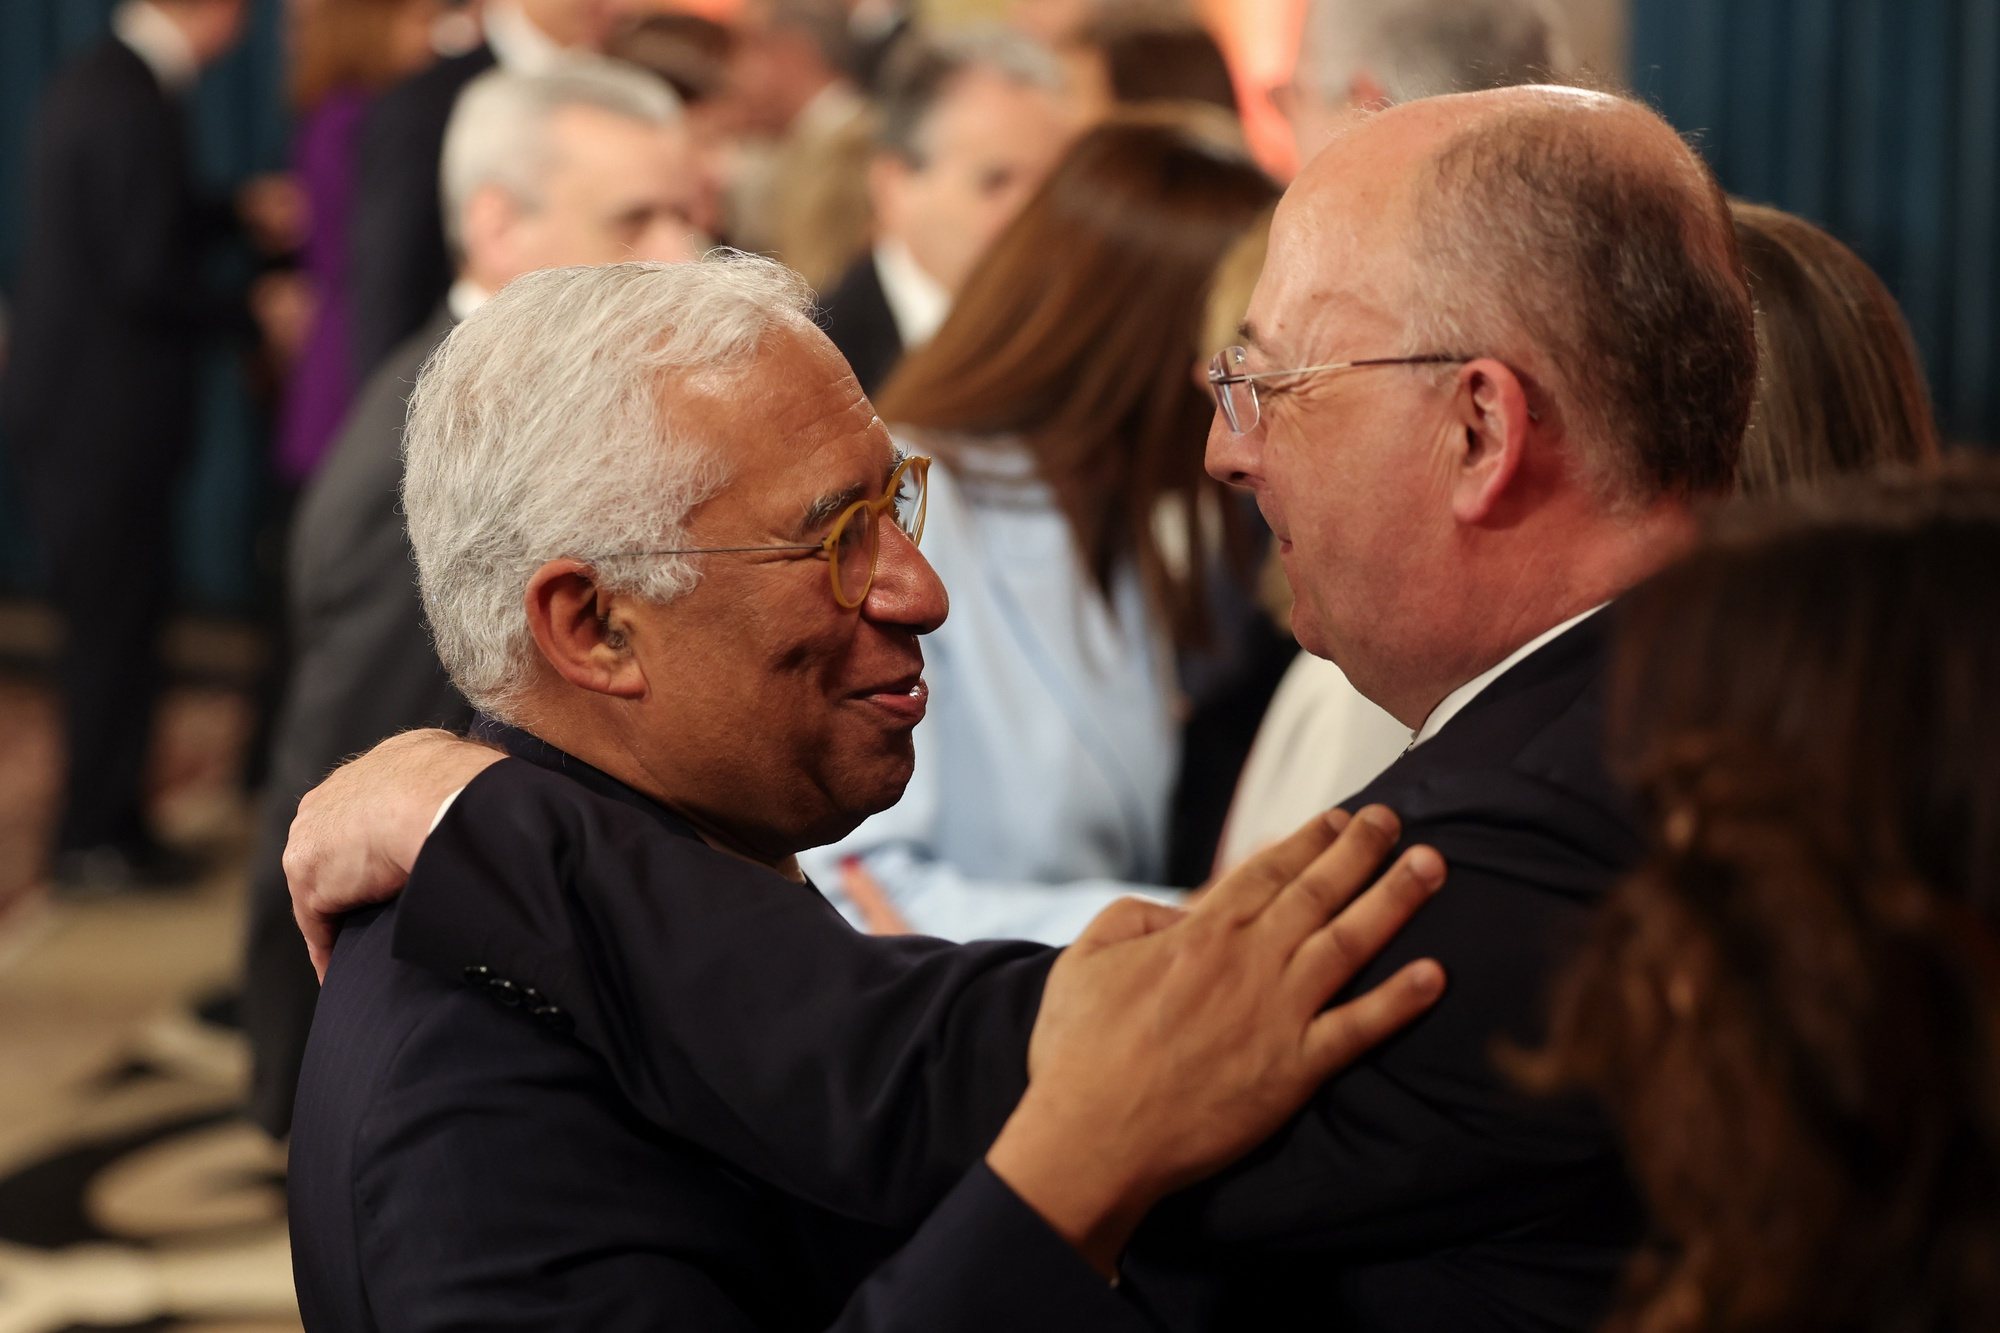 The former Portuguese Prime Minister Antonio Costa (L) and the new Minister for Agriculture and Fisheries, Jose Manuel Fernandes (R) greet each other during the swearing in cerimony of the XXIV Constitutional Government held at Ajuda Palace, in Lisbon, Portugal, 02 April March 2024. These legislative elections resulted in the victory of AD - a pre-election coalition formed by PSD, CDS-PP and People&#039;s Monarchist Party (PPM) - by around 54,000 votes (0.85%) more than the PS, the narrowest margin in the history of Portuguese democracy. The two coalitions led by the PSD (the AD on the mainland and in the Azores, and Madeira Primeiro with the PSD and CDS-PP in Madeira) - won 28.83% of the votes and 80 members of parliament (78 for the PSD and two from the CDS-PP), according to the official results. The PS was the second-most-voted party with 27.98% and 78 MPs. JOAO RELVAS/LUSA